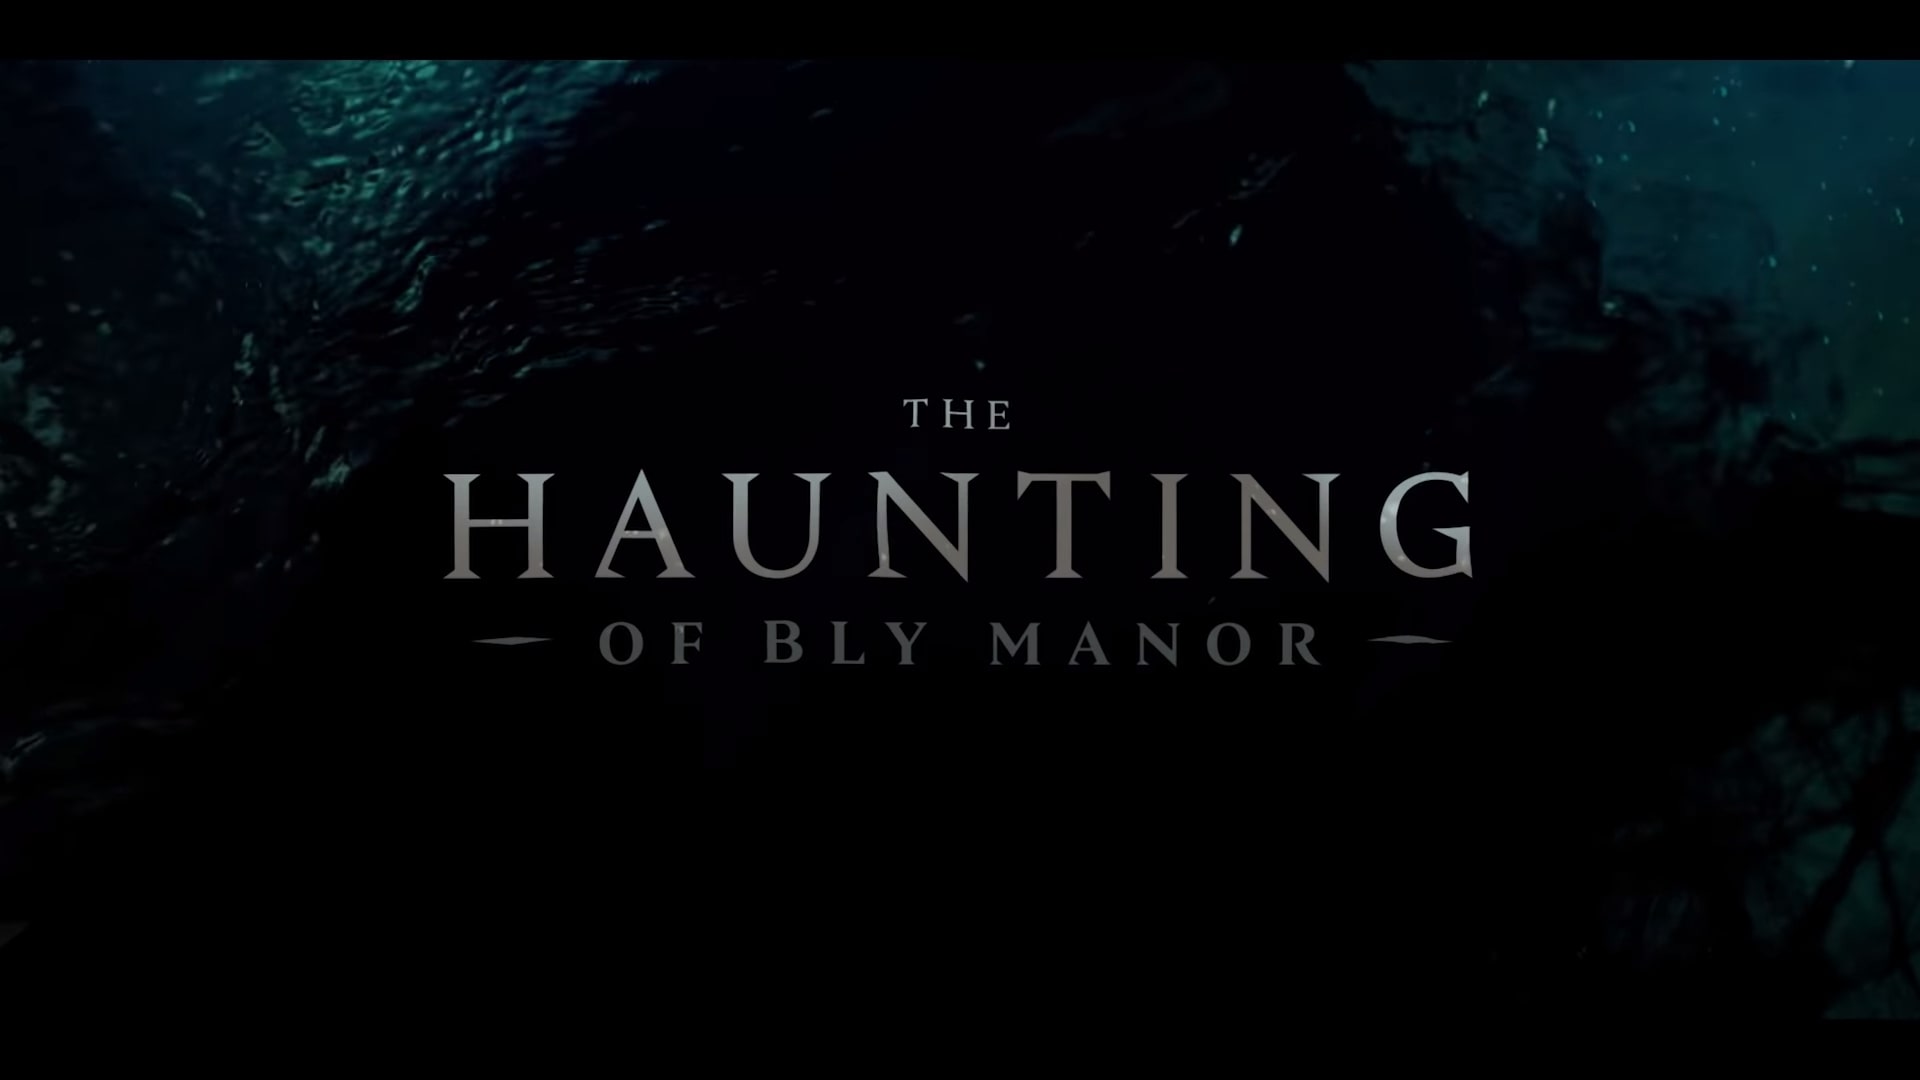 Netflix The Haunting of Bly Manor Trailer, Netflix Drama Series, Netflix Horror Series, Coming to Netflix in October 2020